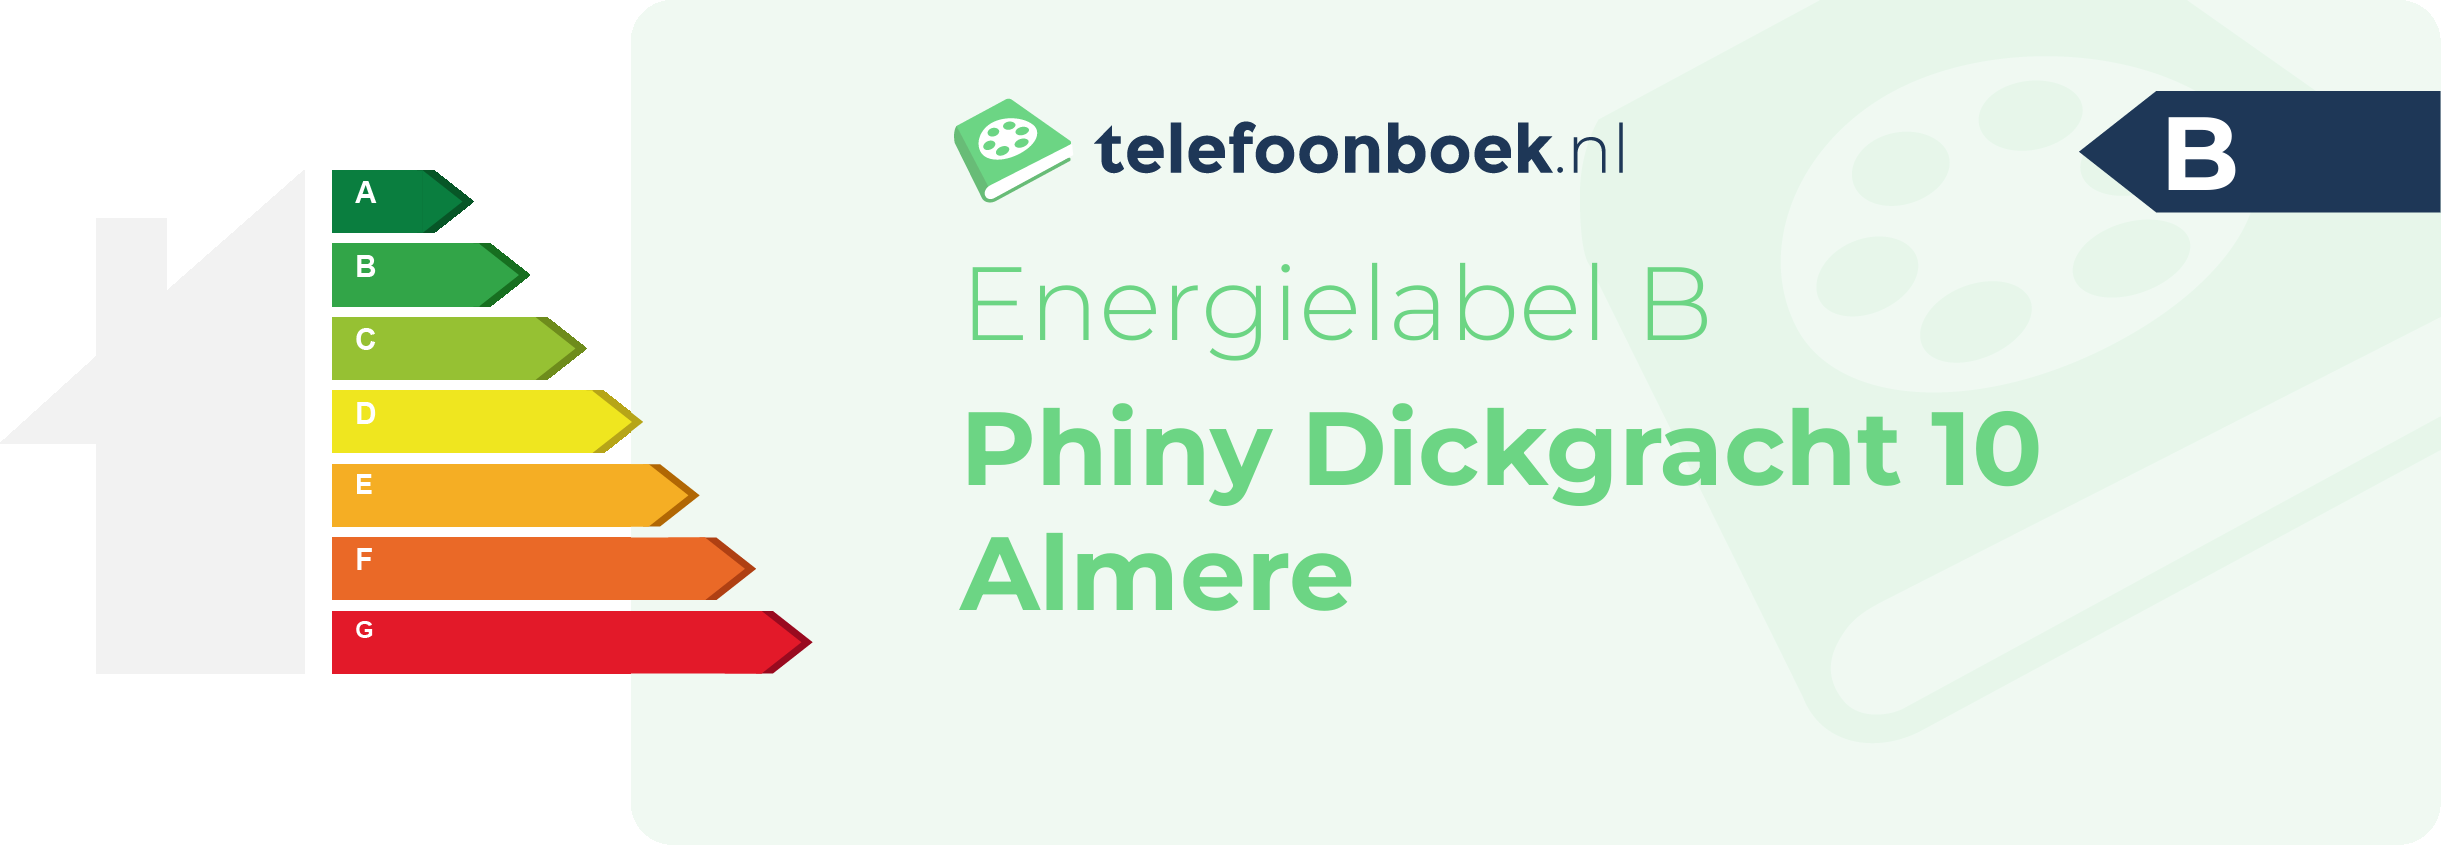 Energielabel Phiny Dickgracht 10 Almere